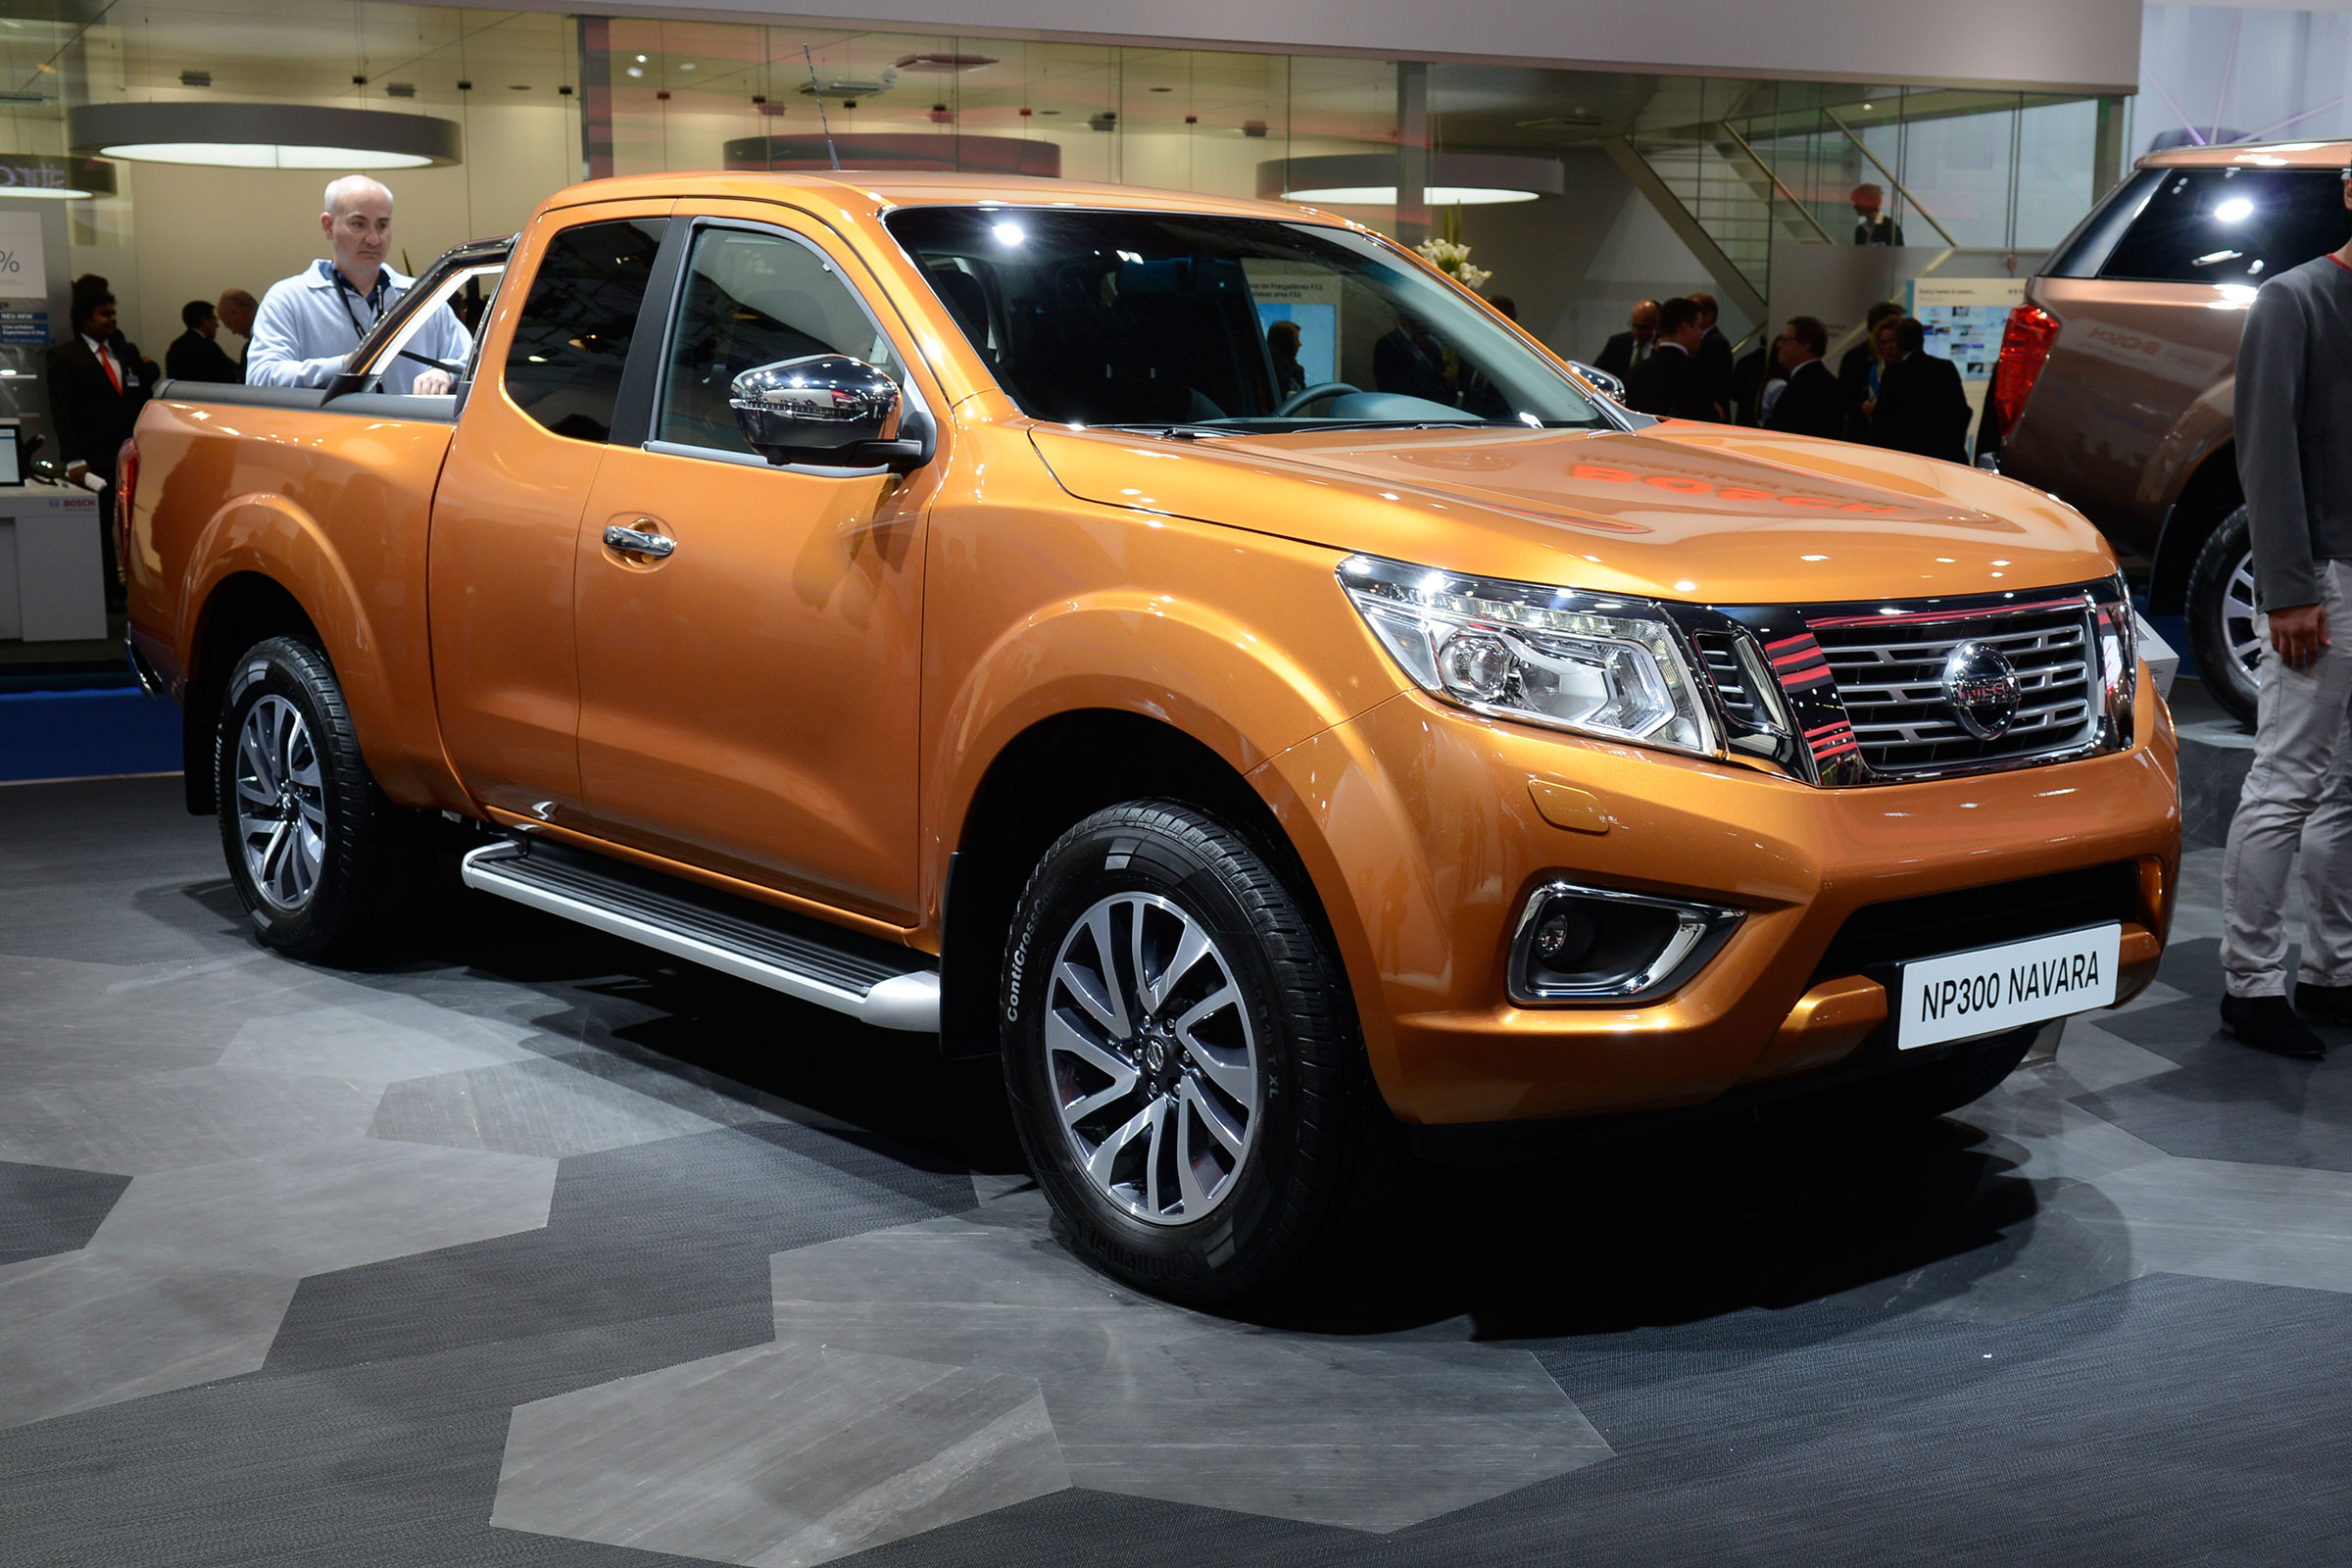 New Nissan Navara prices, specs and release date Carbuyer